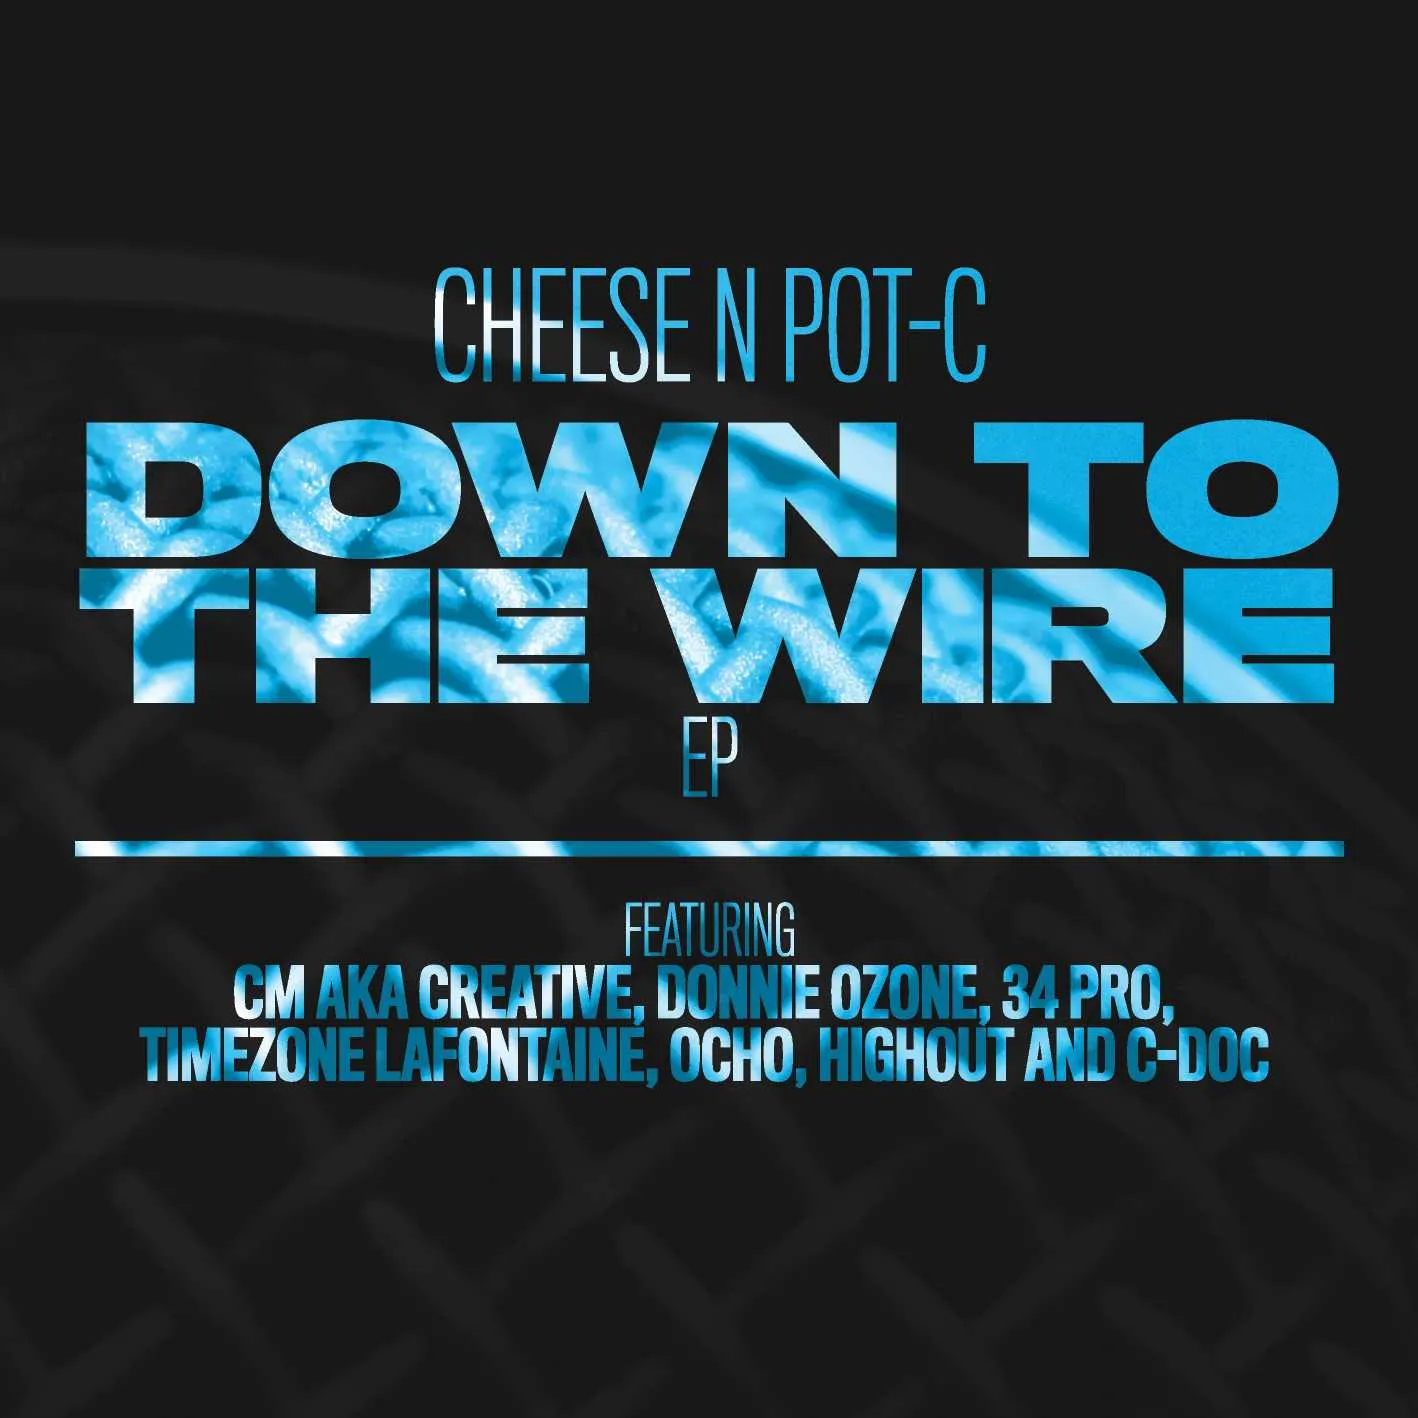 Cheese N Pot-C - Down To The Wire EP cover